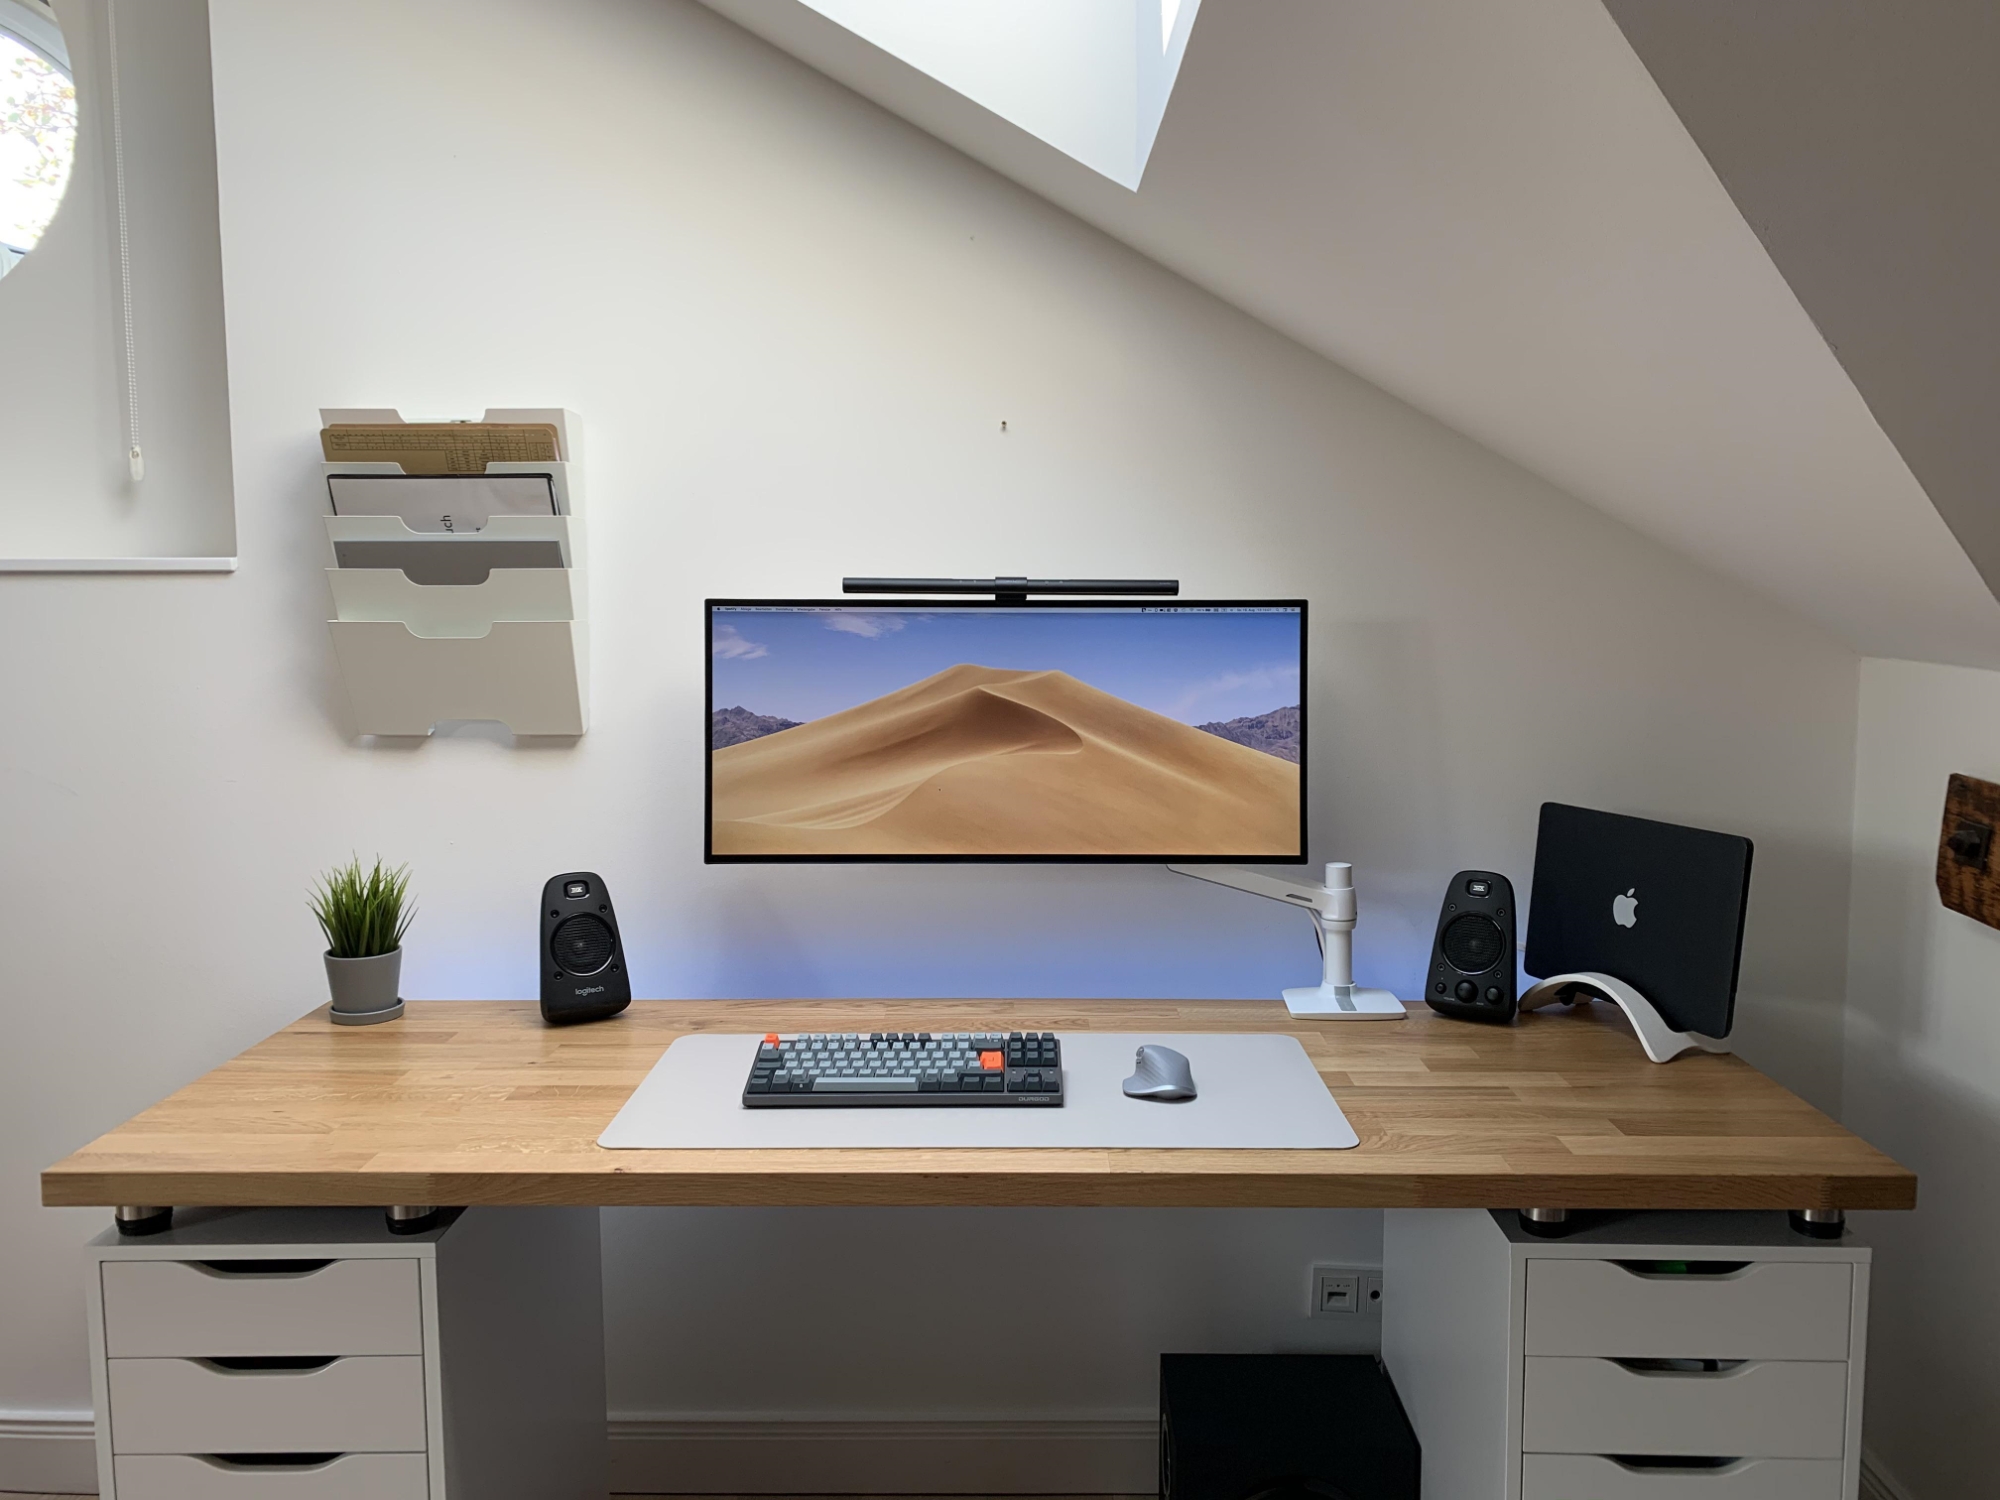 ergonomic How To Make A Desk From Ikea with Dual Monitor